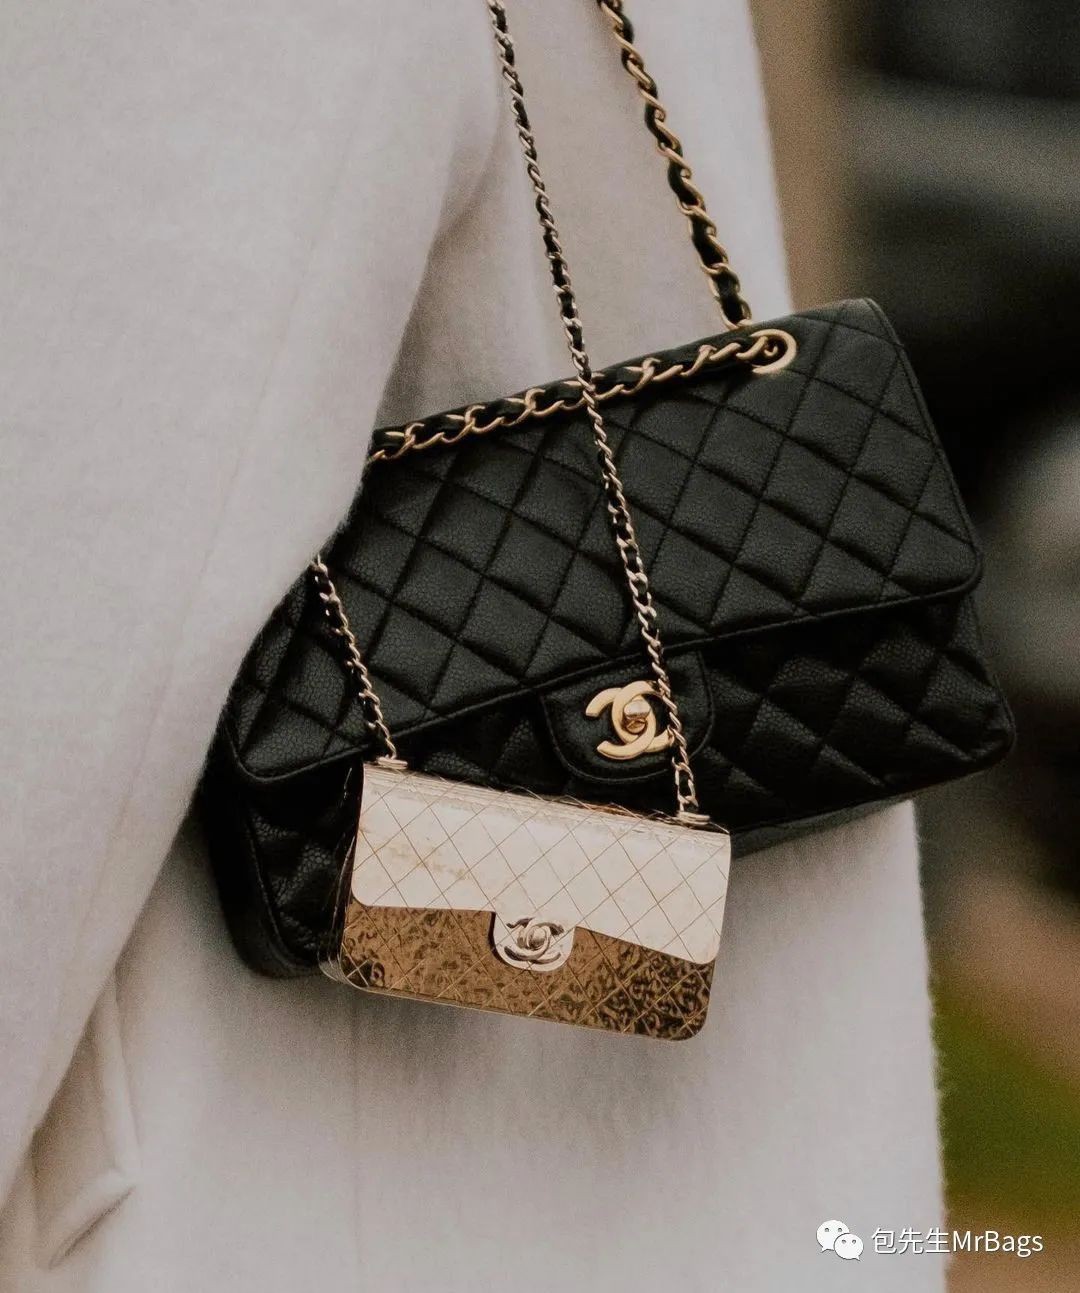 Chanel bags are too expensive, what should I do? (2023 updated)-Best Quality Fake designer Bag Review, Replica designer bag ru